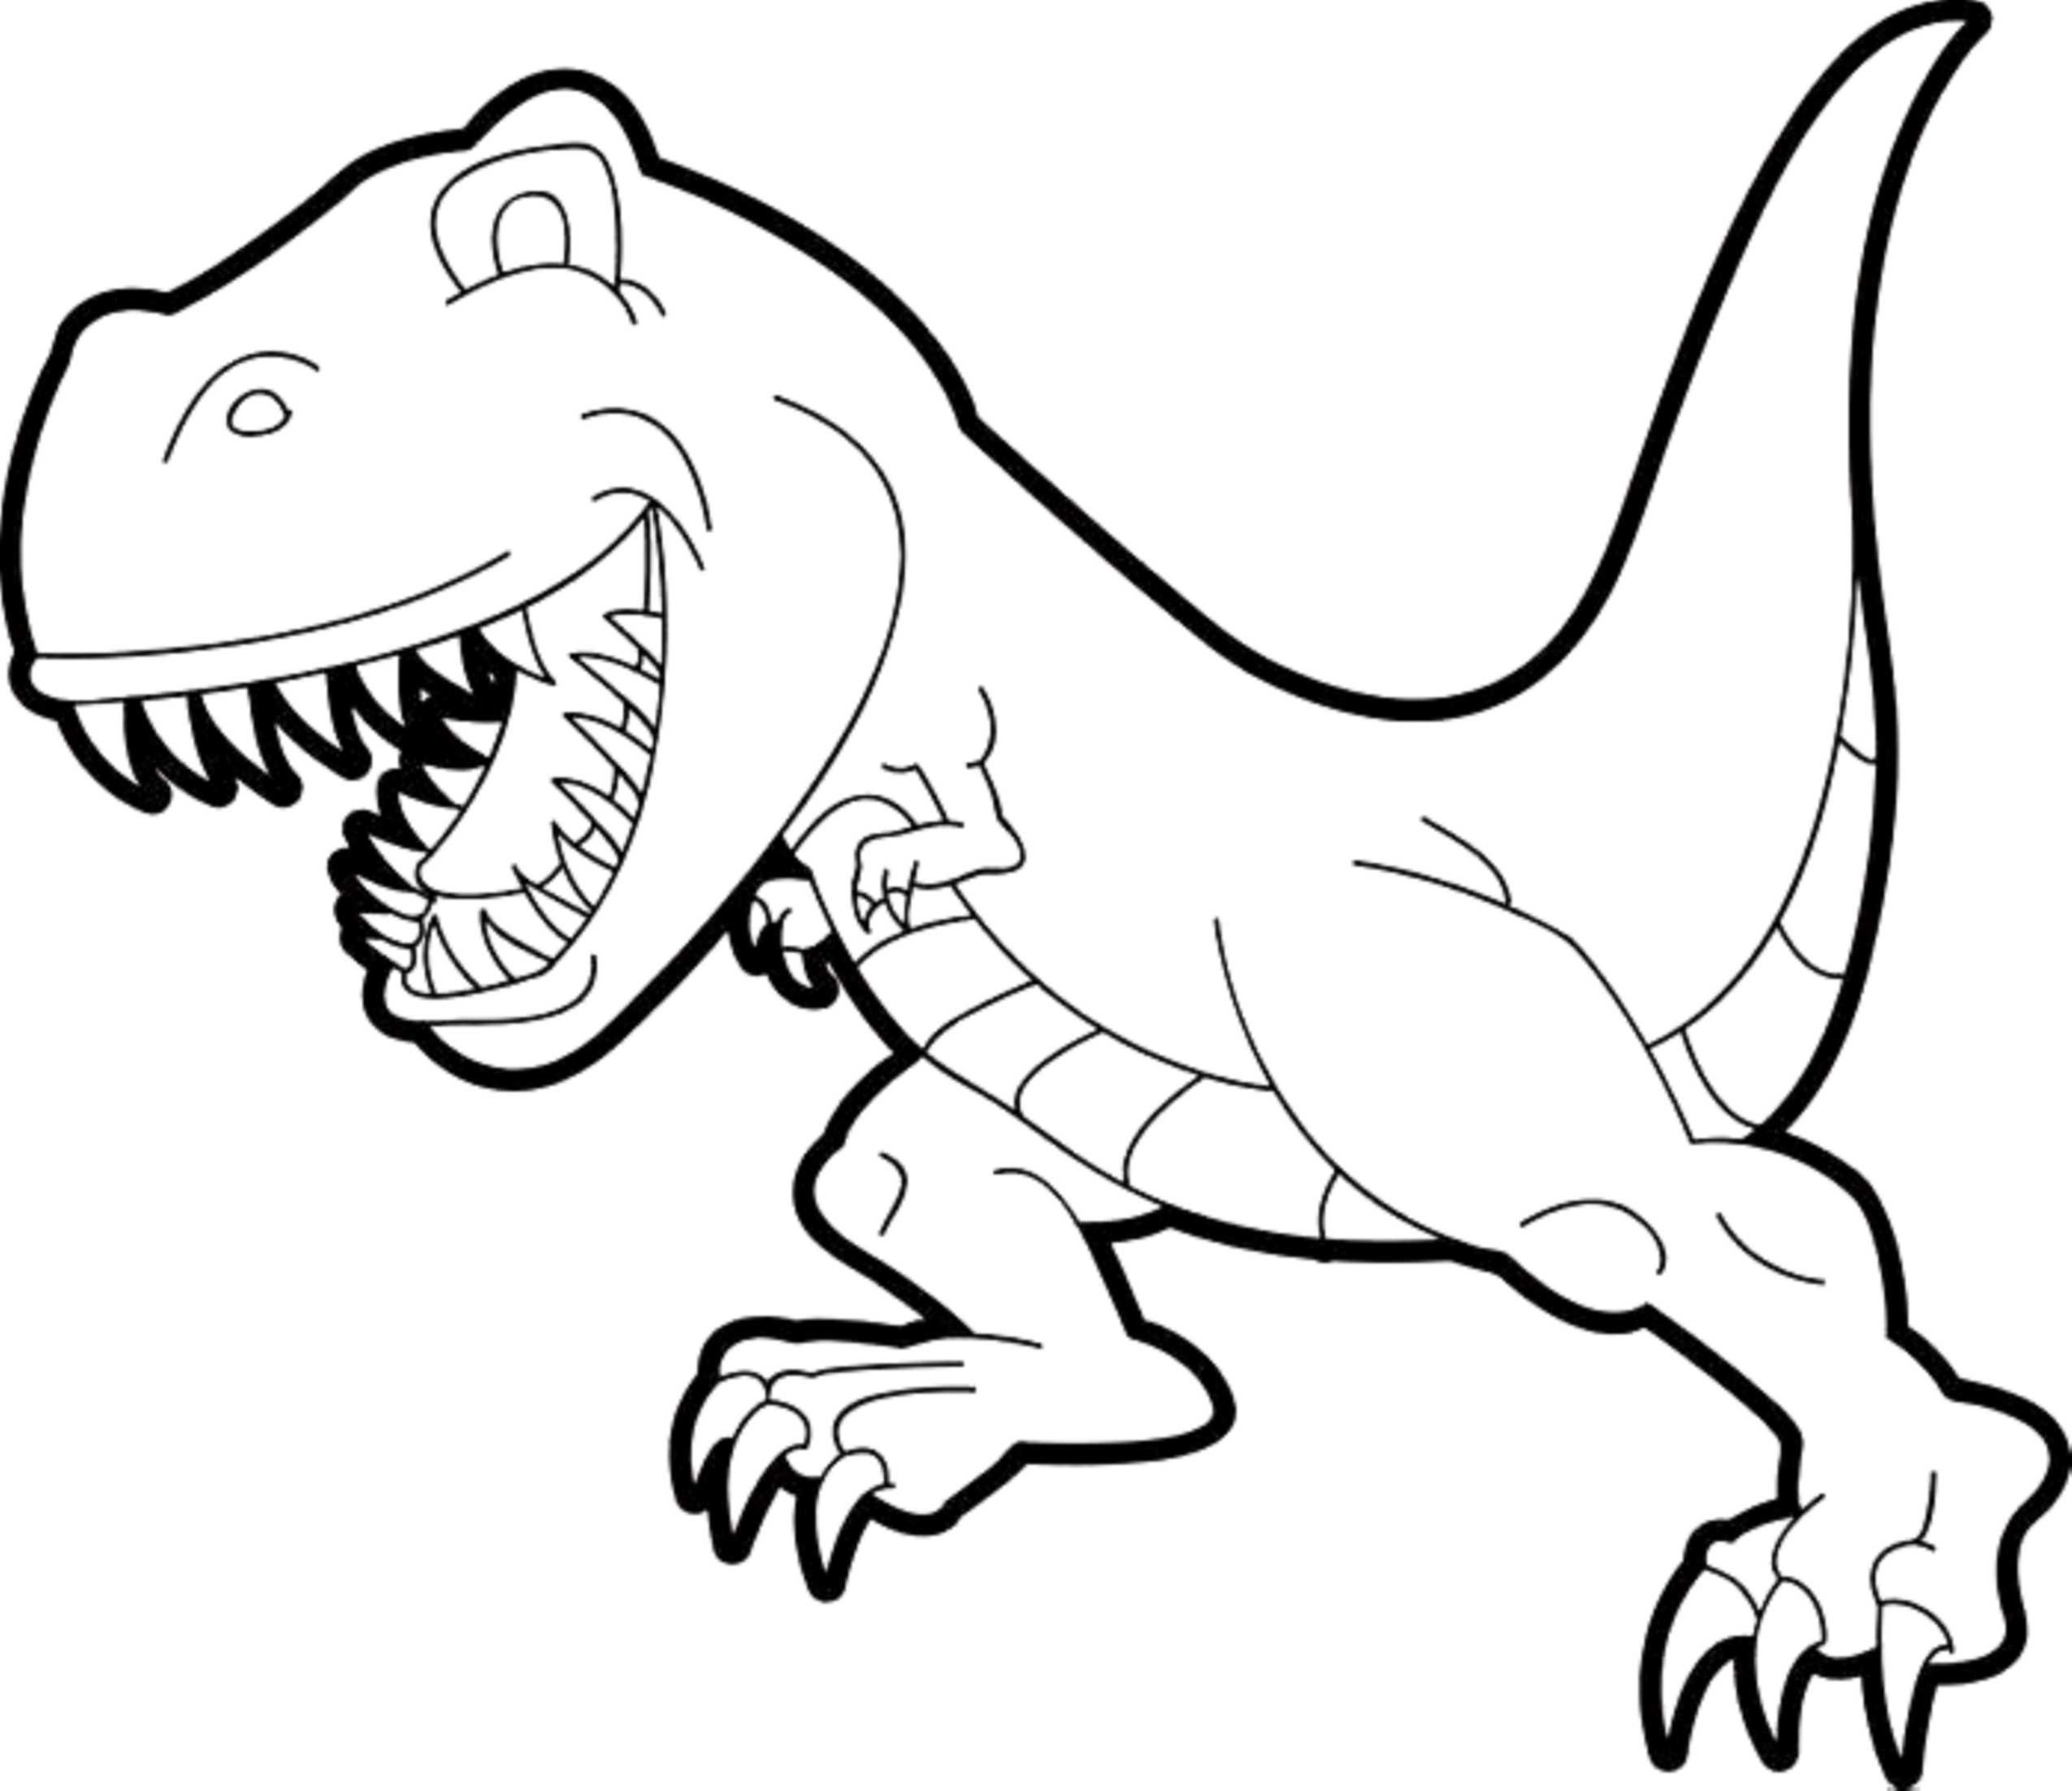 T Rex Coloring Page Simple T Rex Coloring Pages Kids Colouring Pages